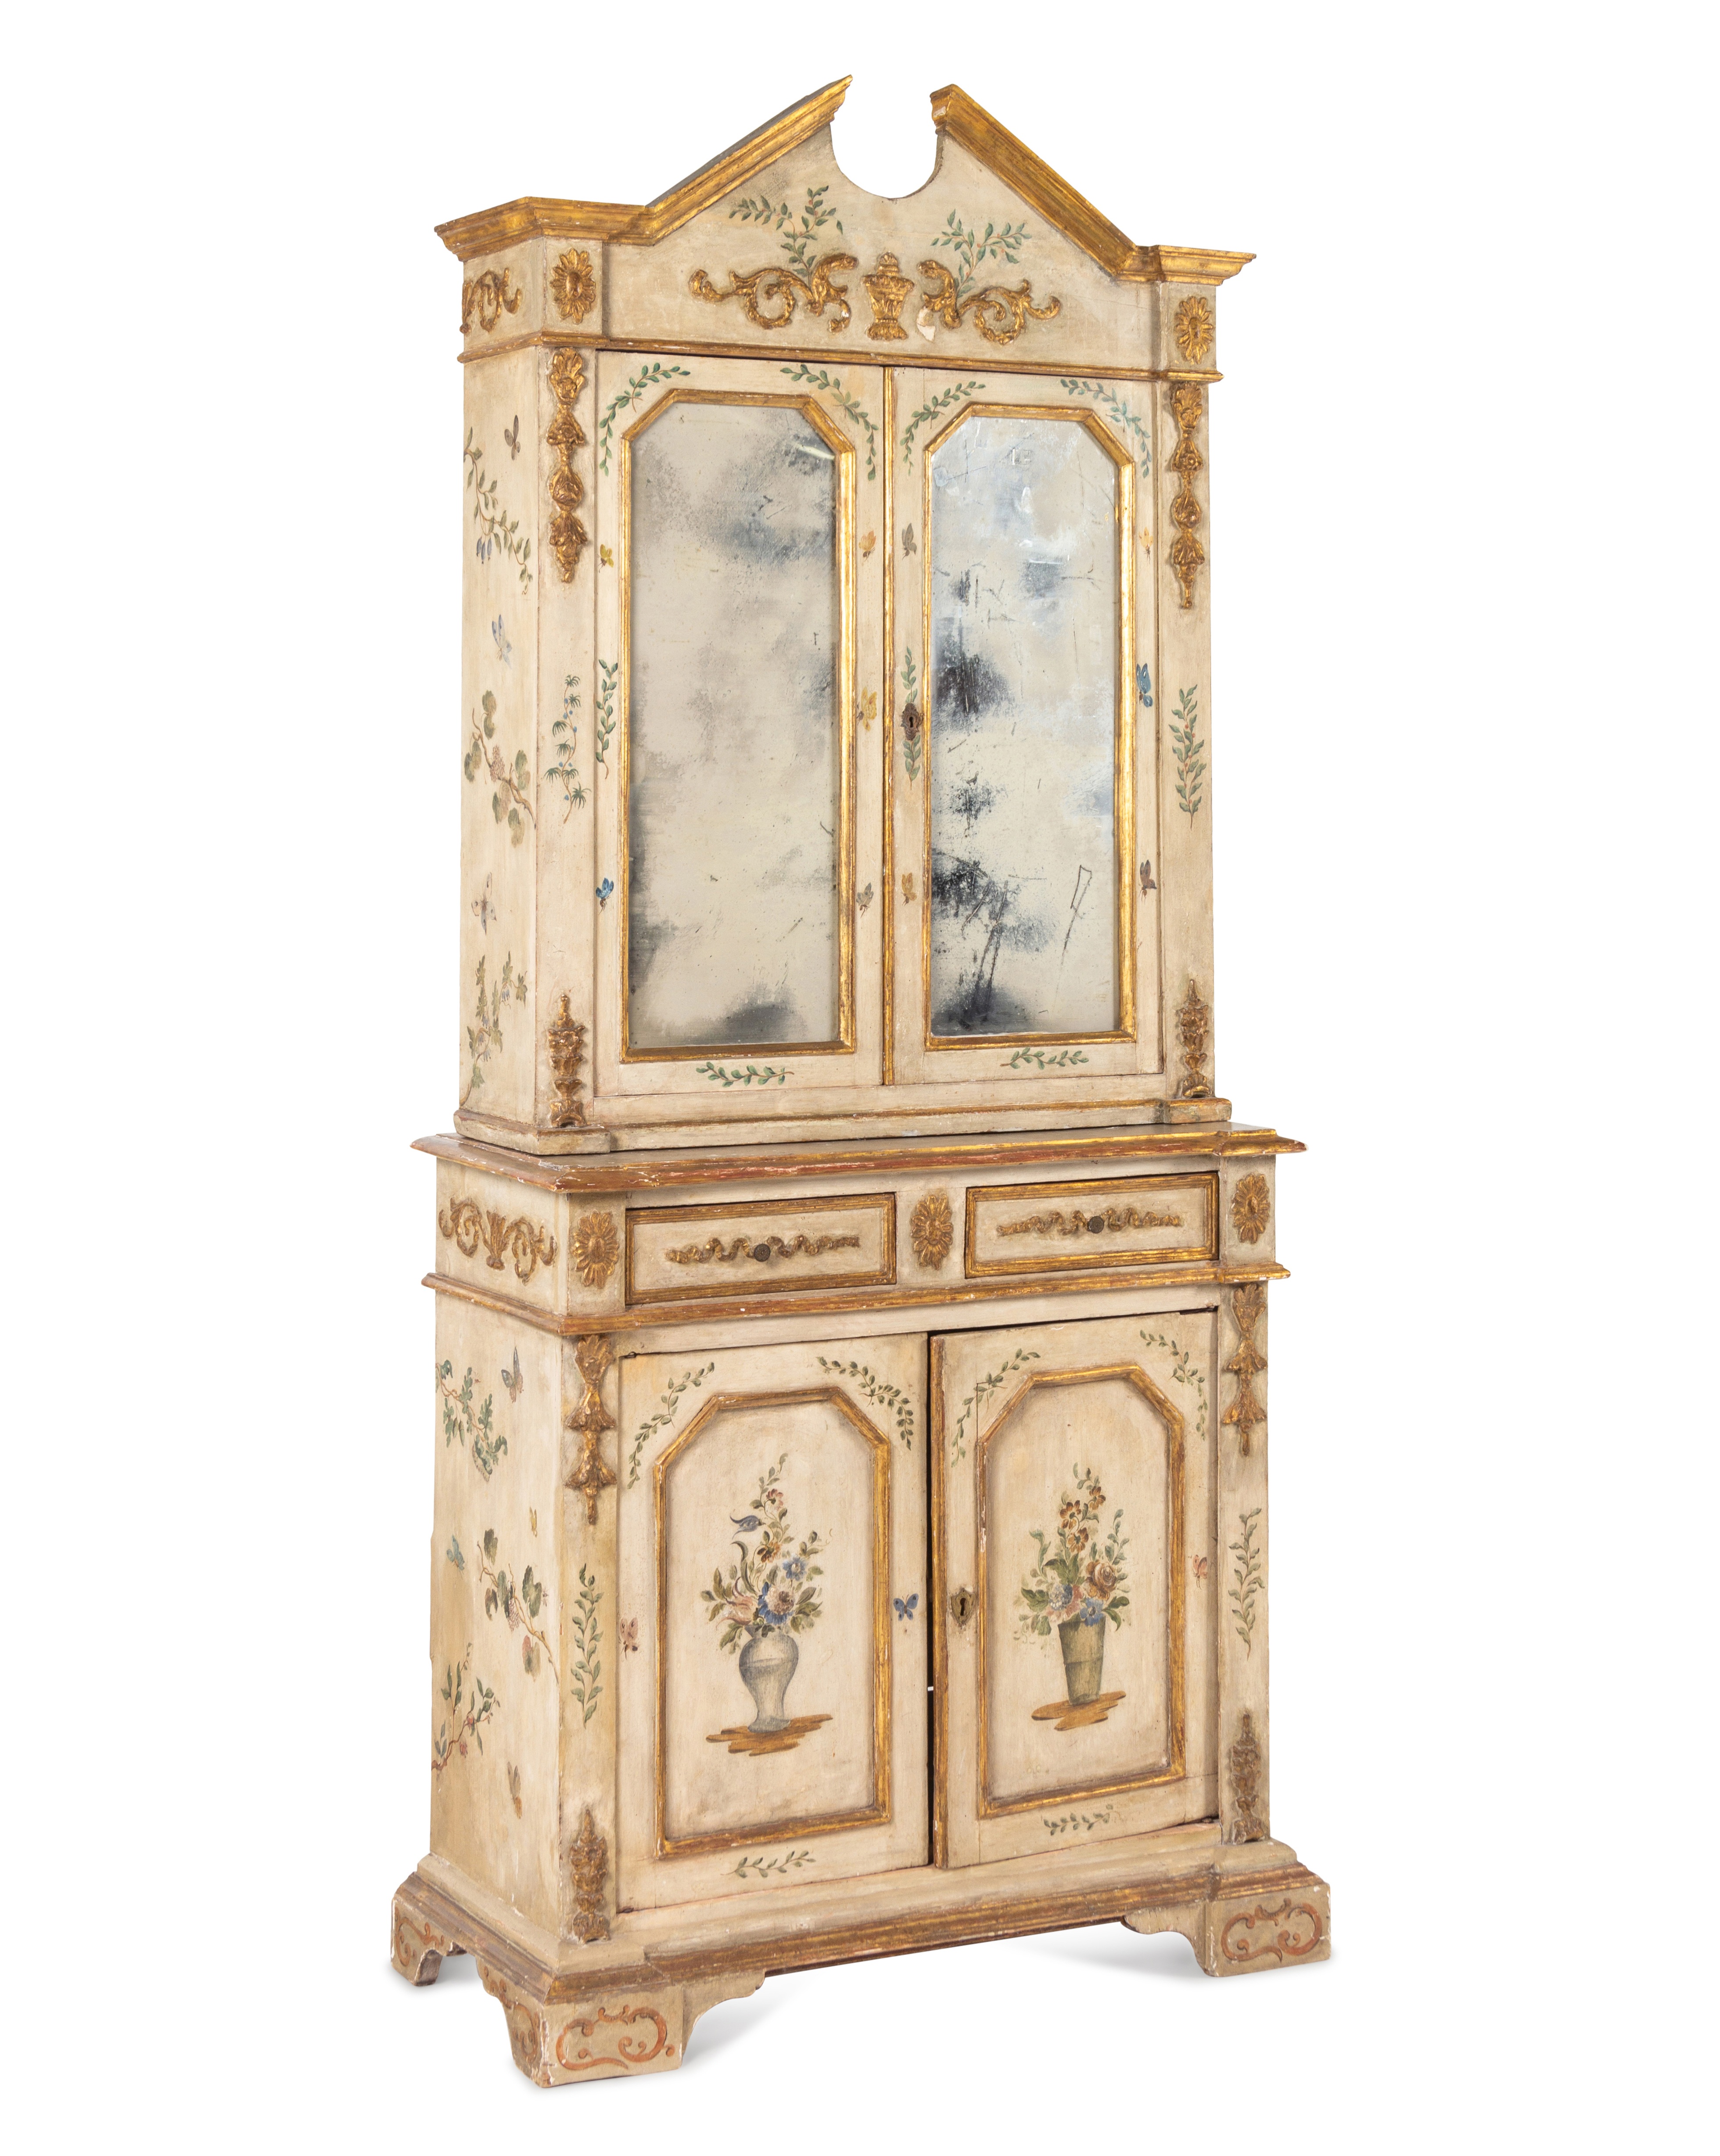 An Italian Polychrome and Cream-Painted and Parcel-Gilt Cabinet - Image 4 of 15